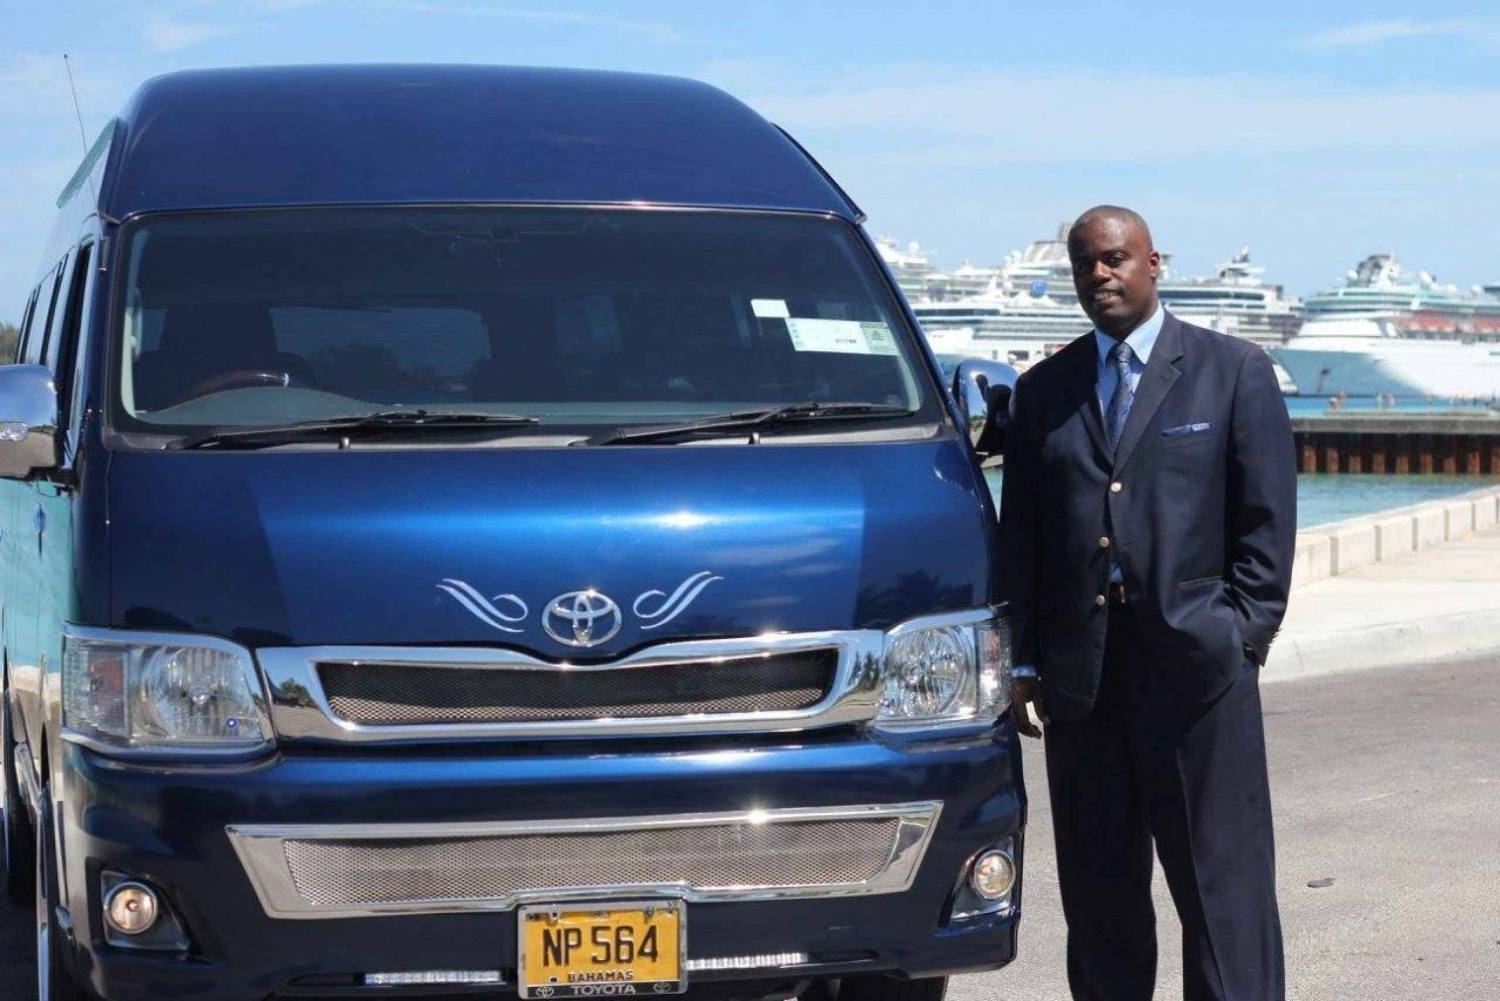 Nassau: Transfer from Nassau Airport to Lyford Cay